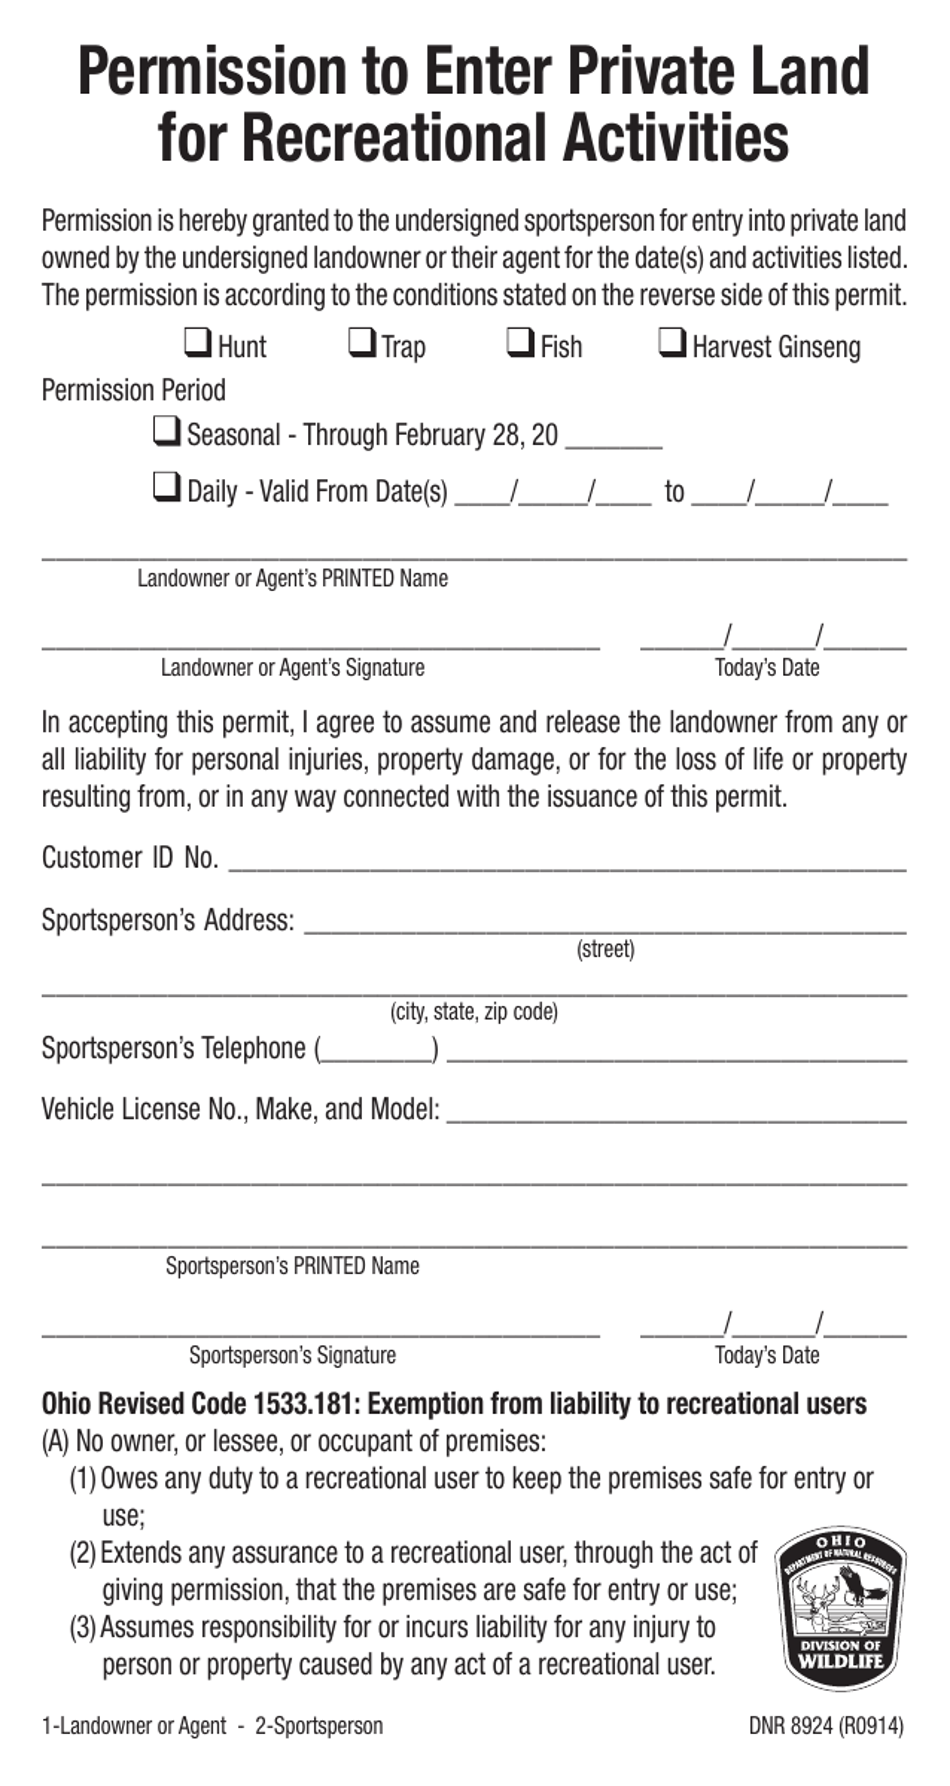 Form DNR8924 Permission to Enter Private Land for Recreational Activities - Ohio, Page 1